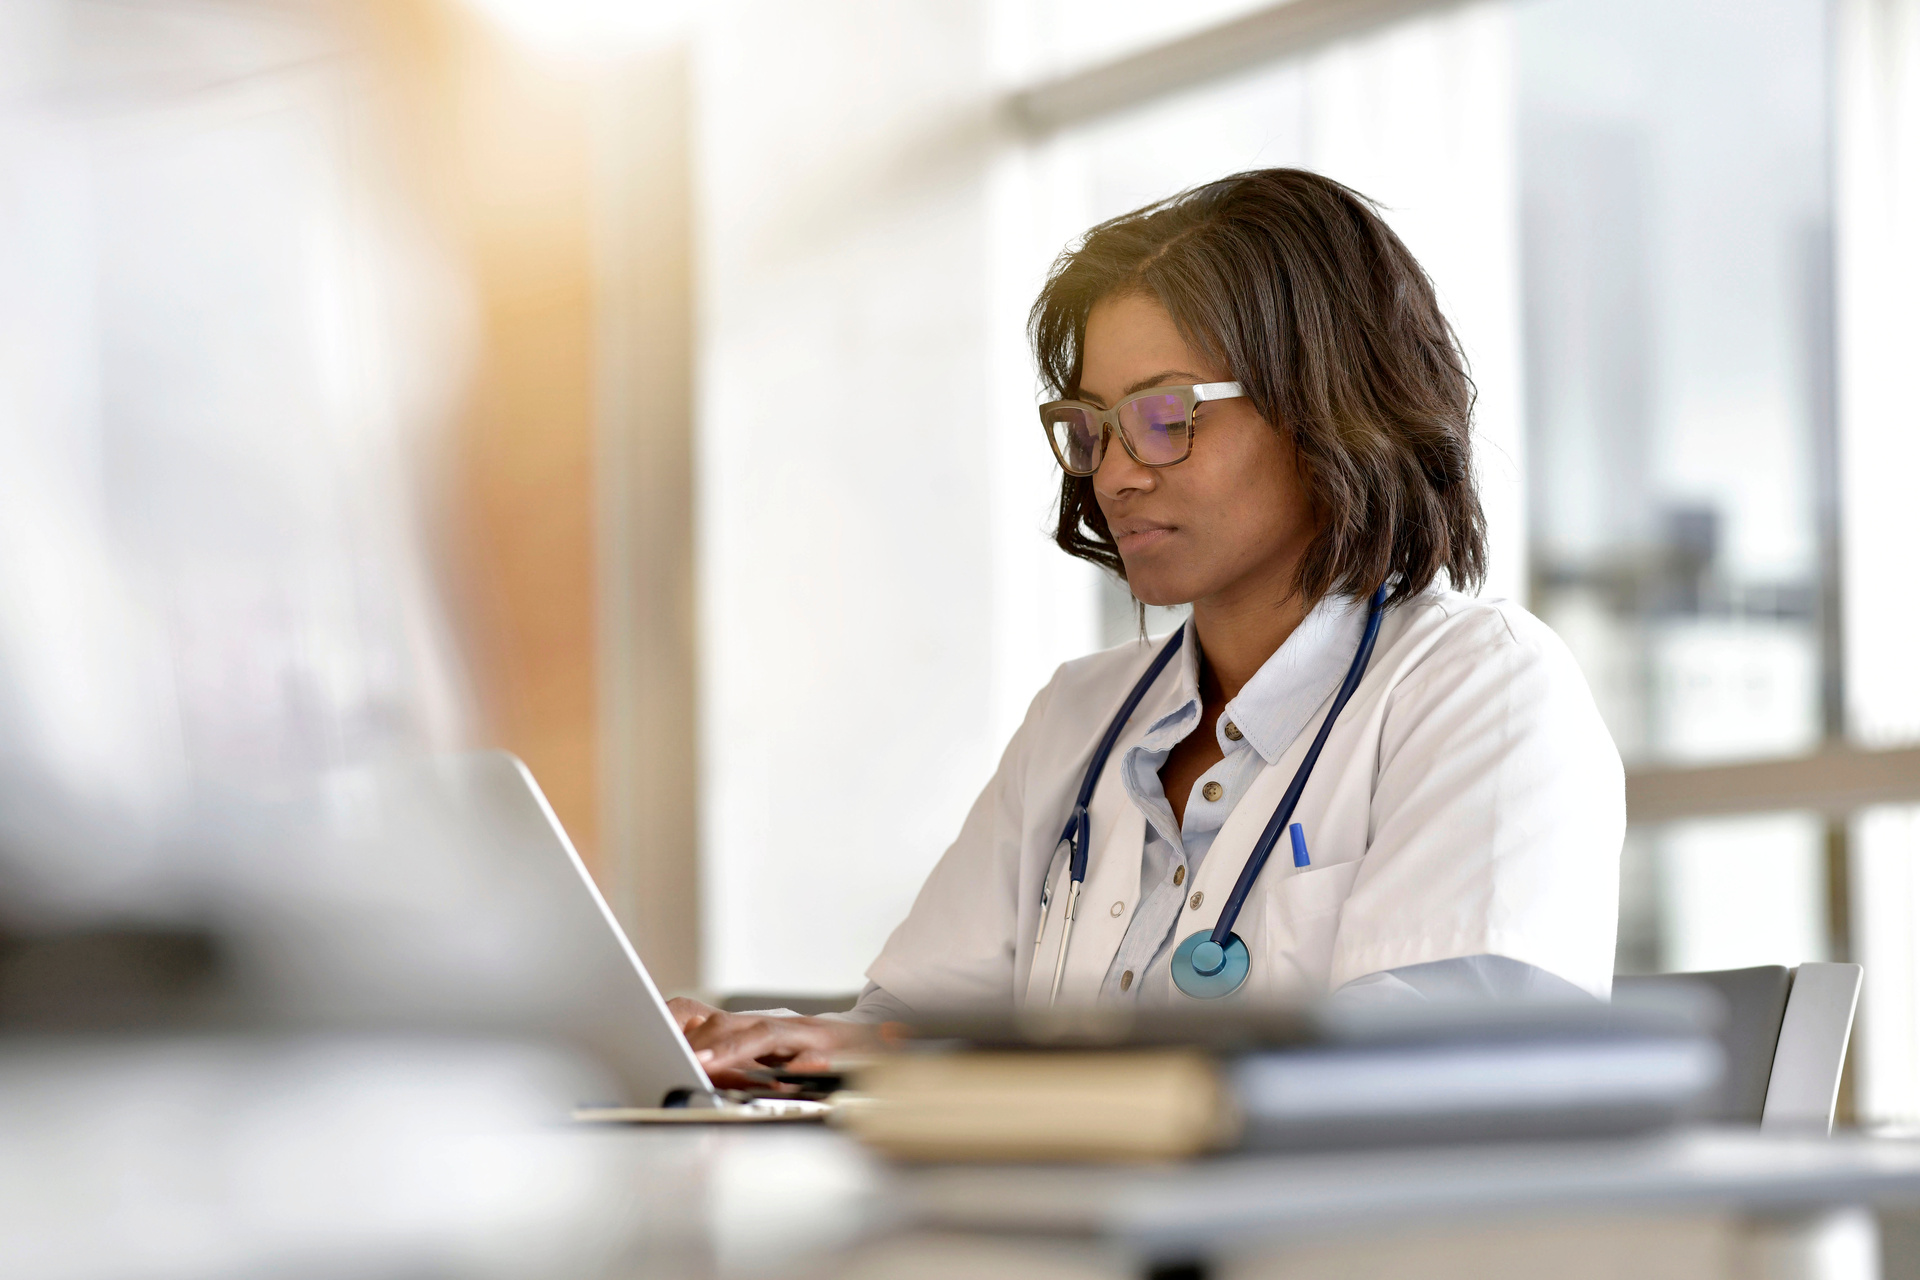 Black female medical professional working at a laptop